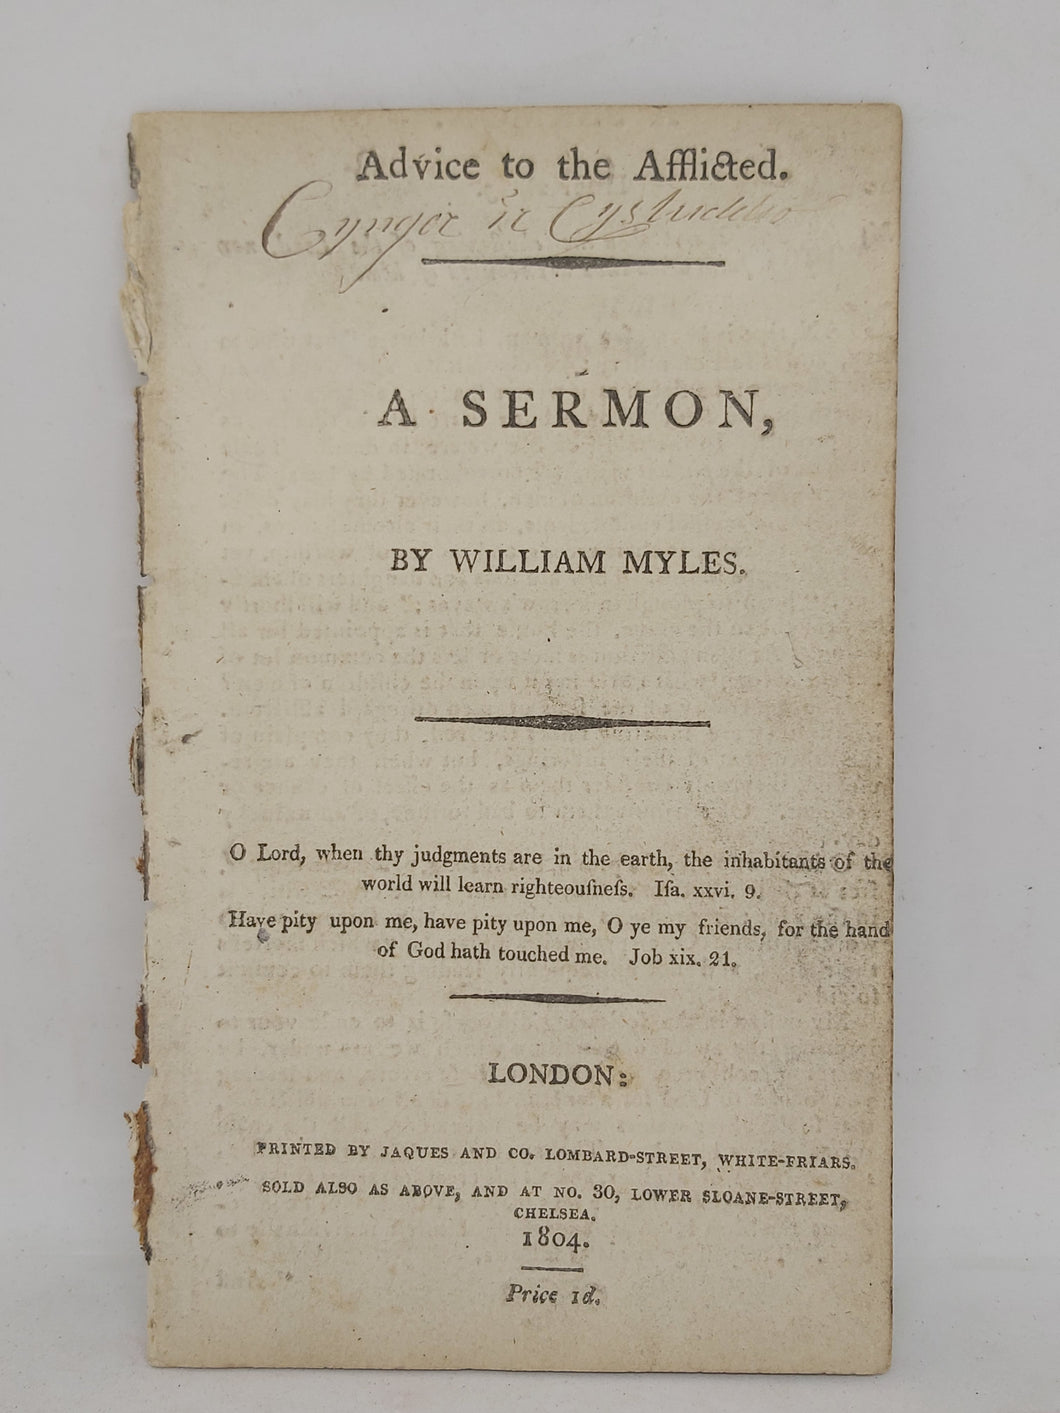 Advice to the afflicted: a sermon, 1804